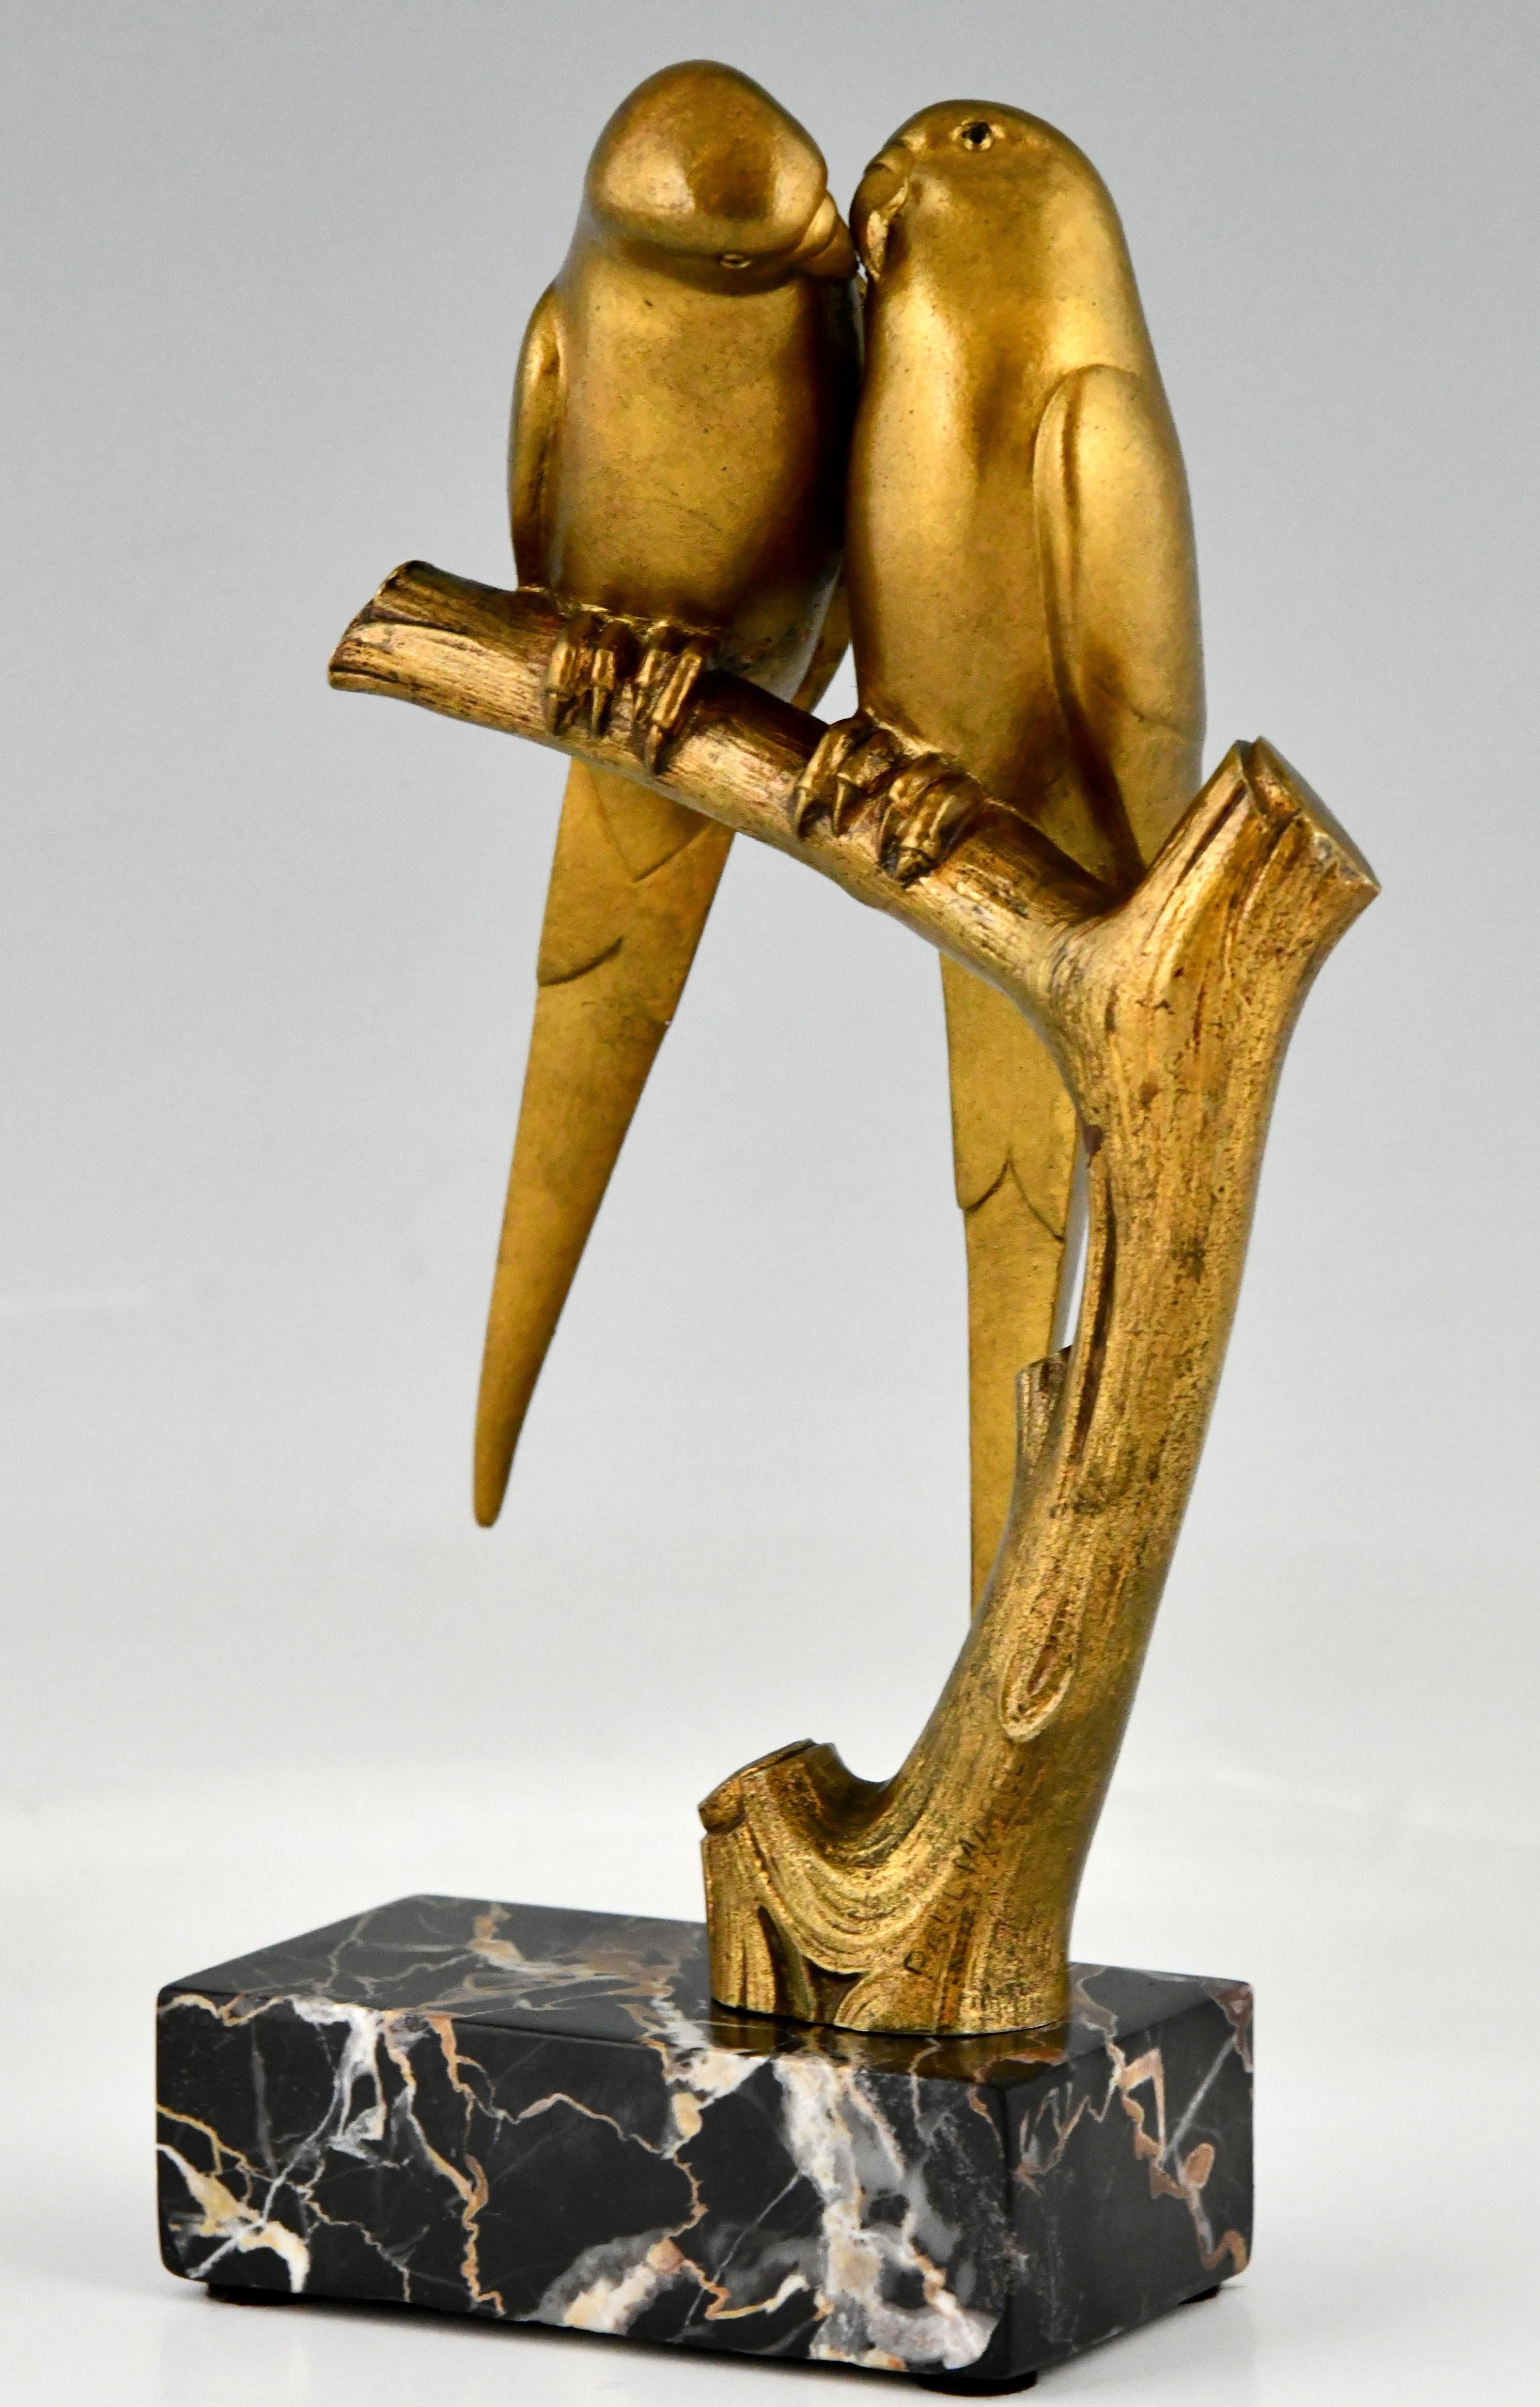 Art Deco bronze sculpture of two parakeet birds on a branch, lovebirds. The statue is signed by Paul Marec. Gilt bronze on a Portor marble base. France 1925.